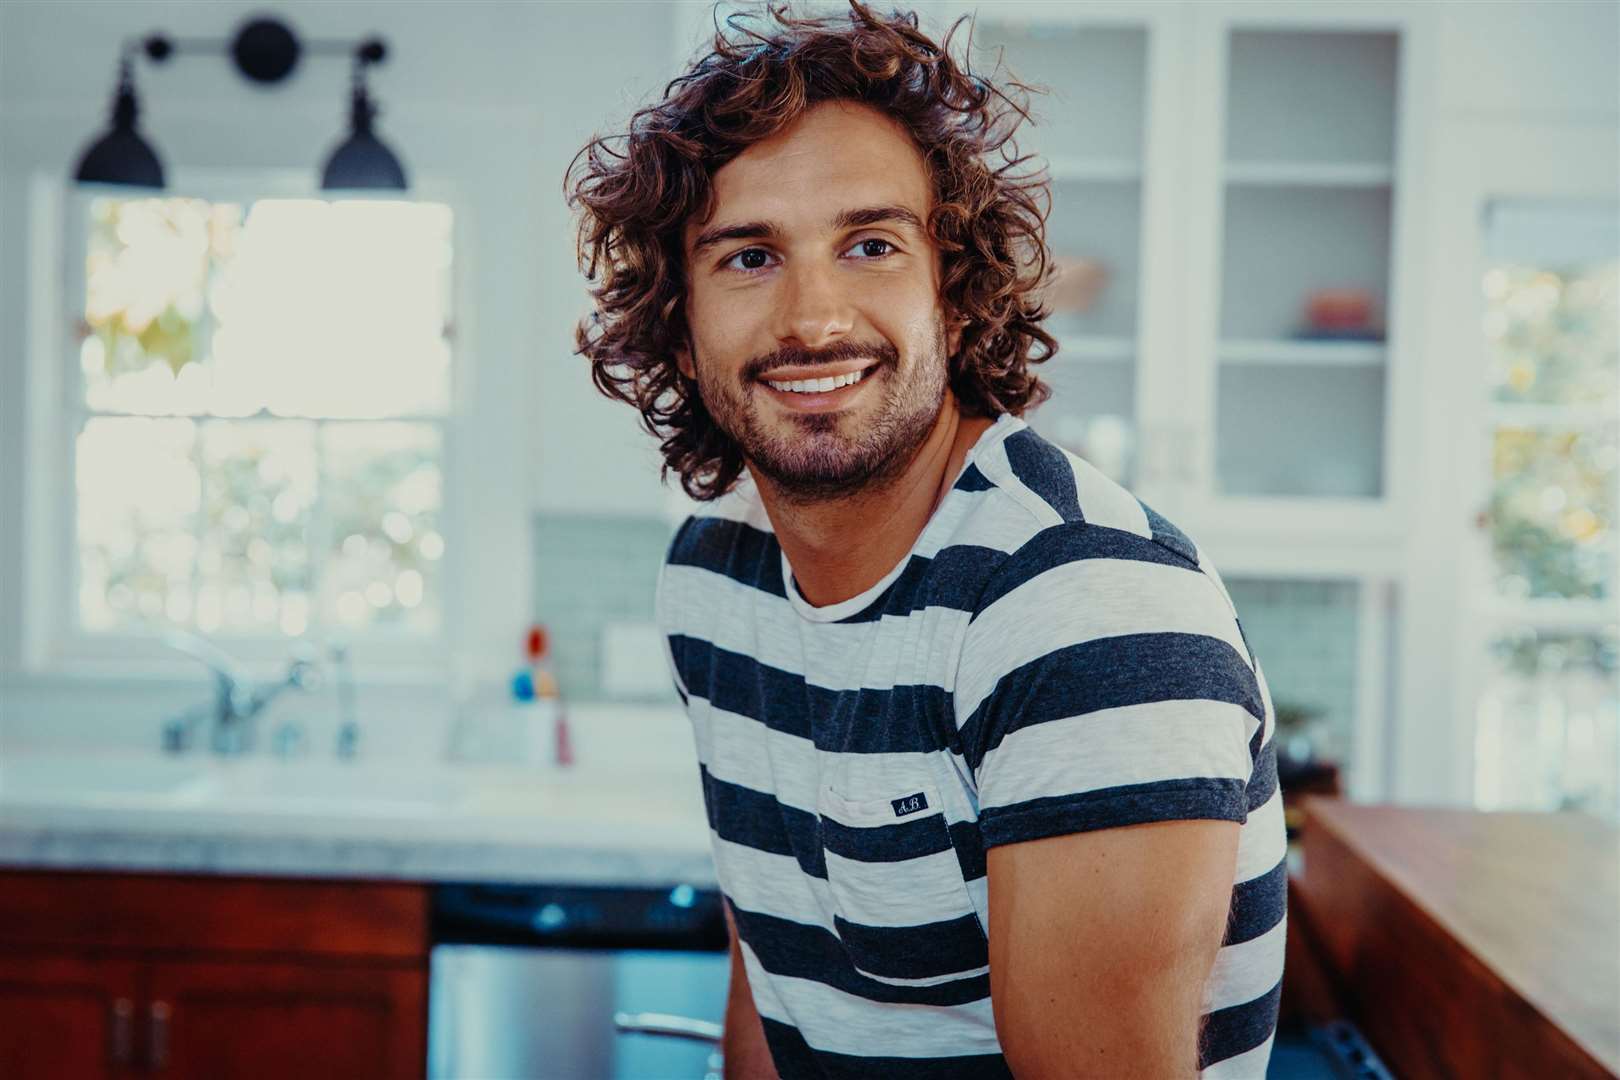 Joe Wicks says he's bringing back the PE lessons three days a week to 'lift spirits'